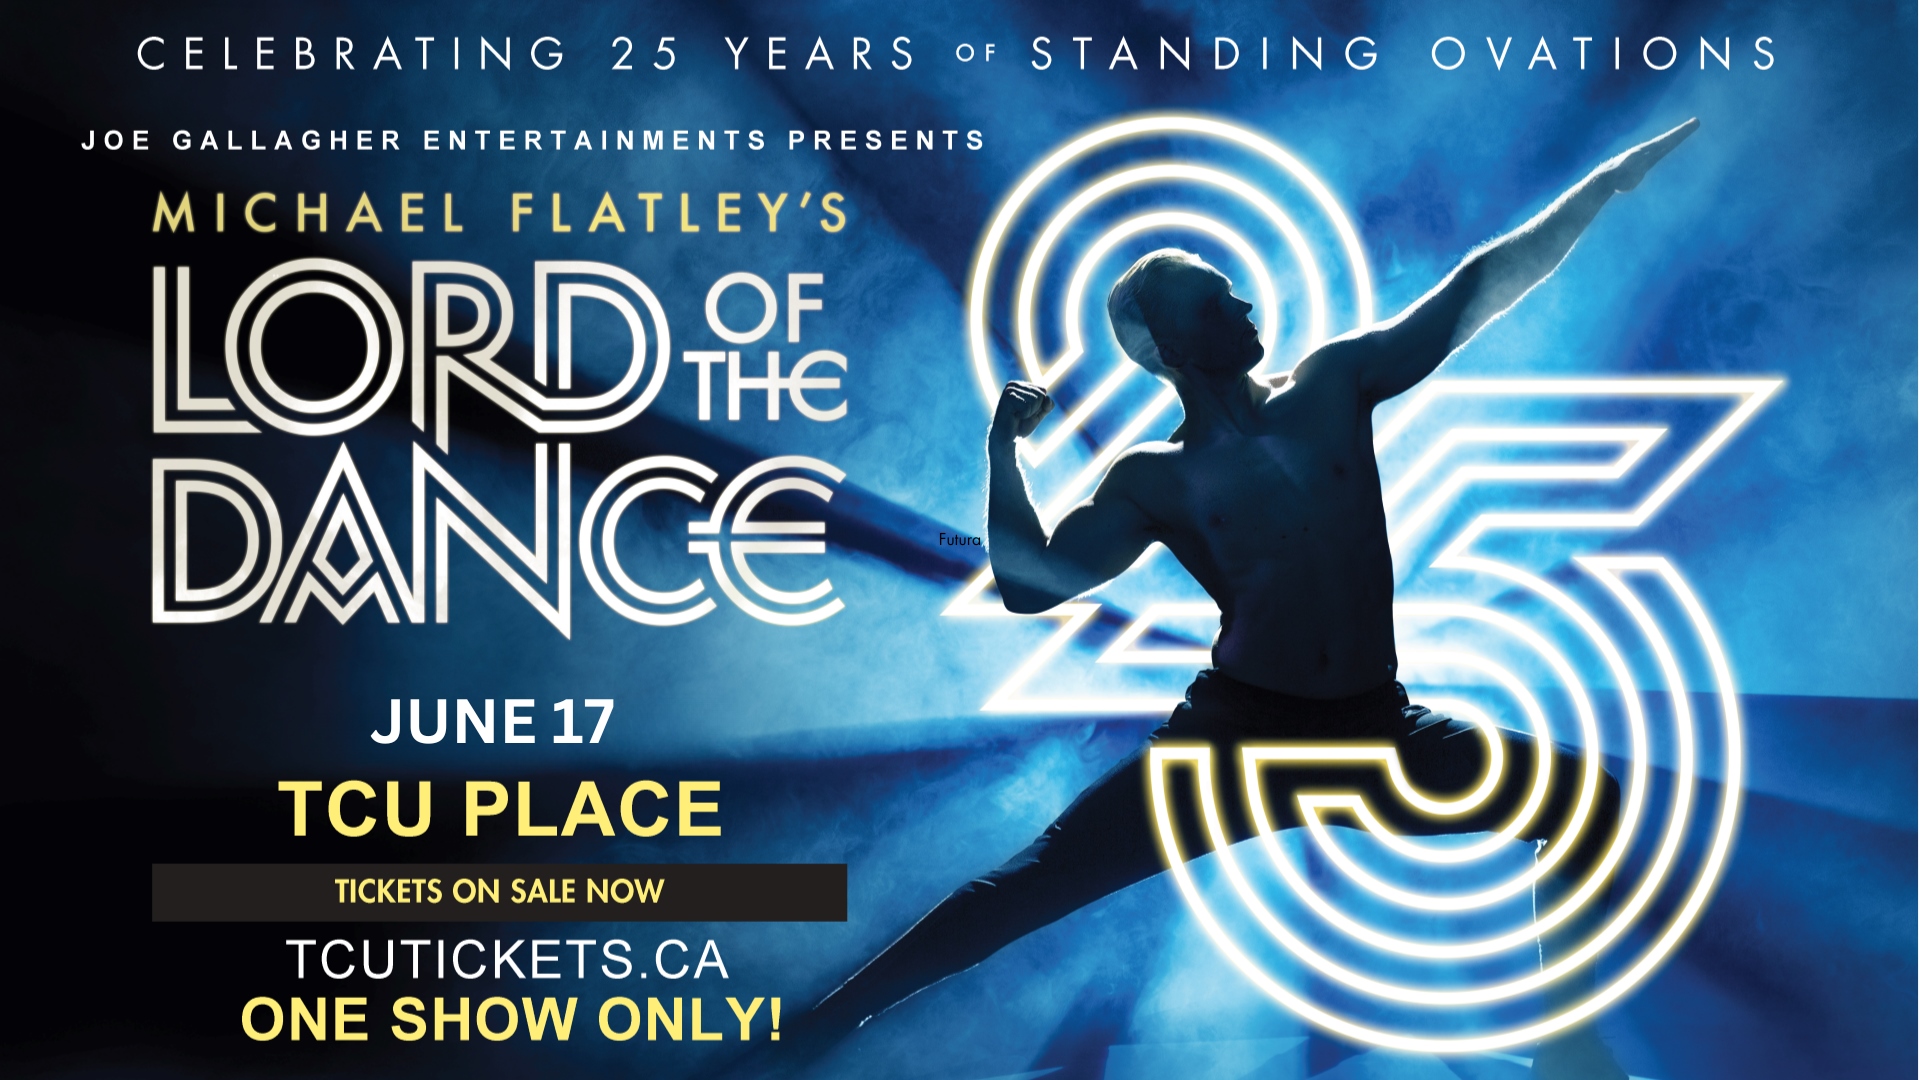 Michael Flatley's Lord of the Dance - 25 Years